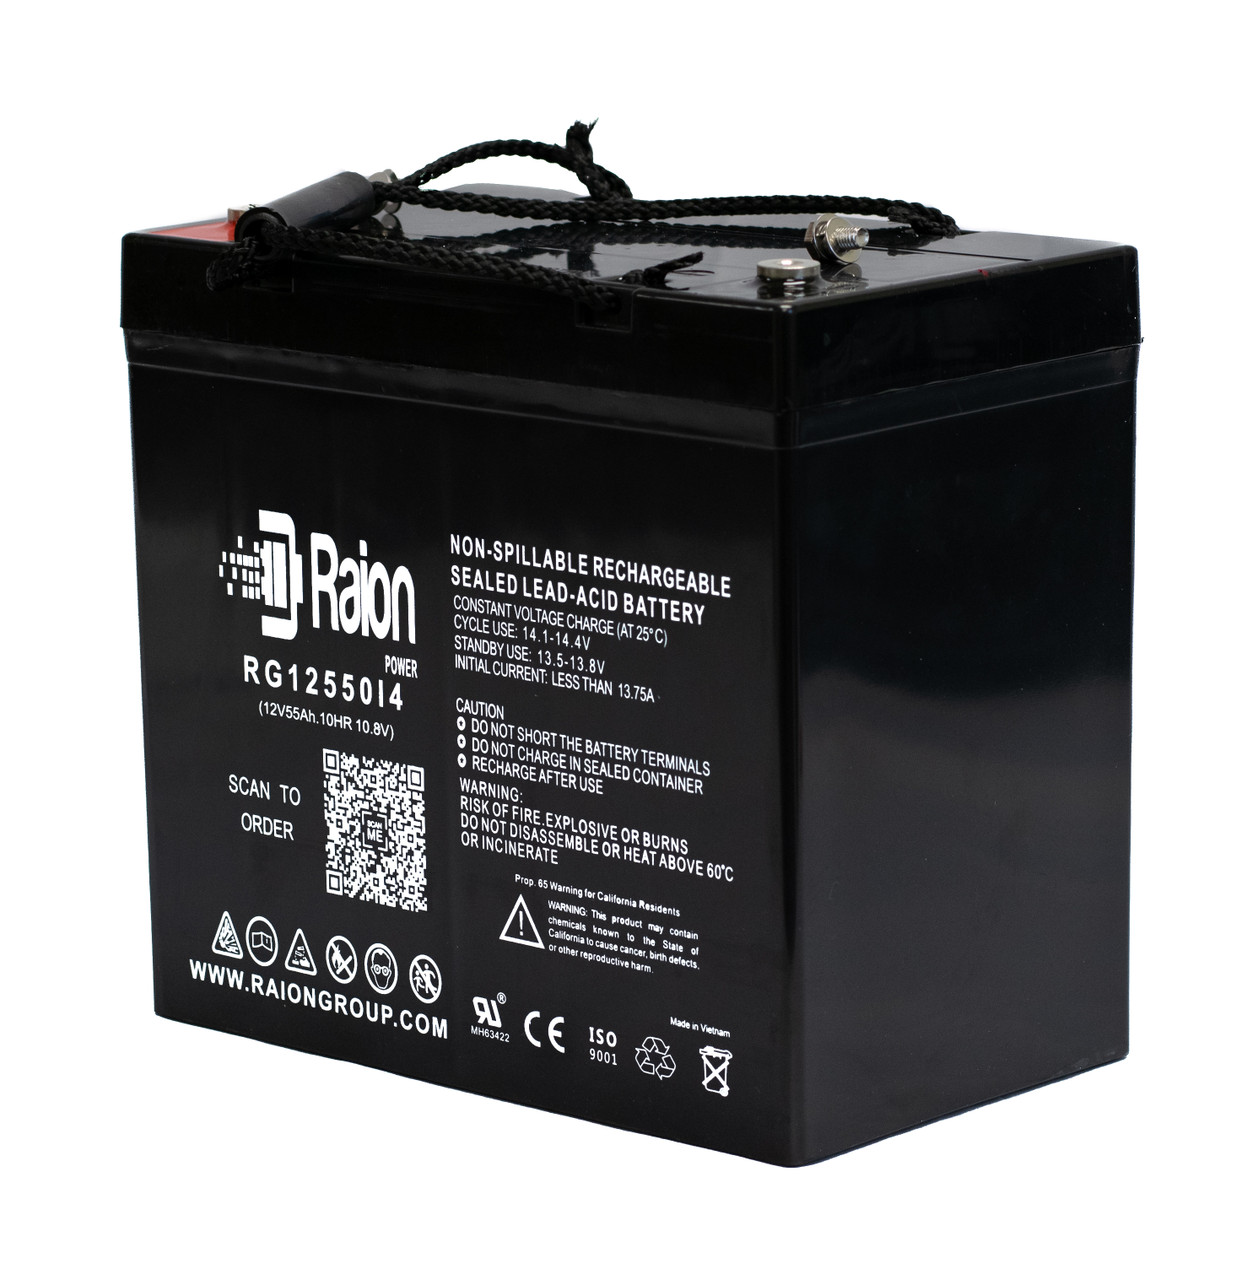 Raion Power 12V 55Ah 22NF Mobility Scooter Battery Replacement for Fortress Scientific 655FS